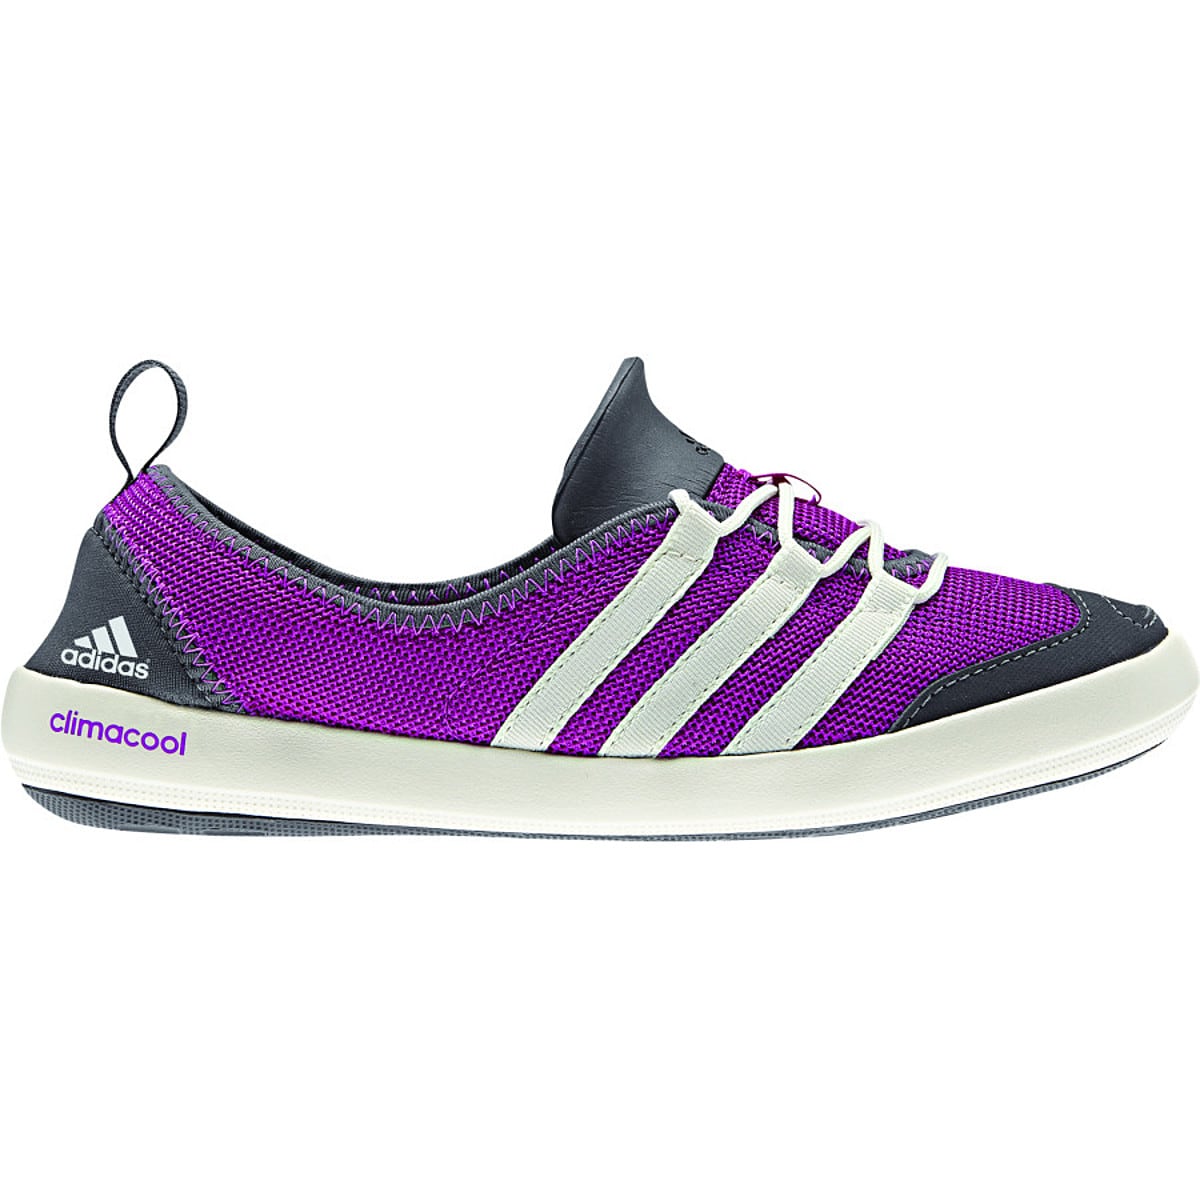 adidas climacool womens water shoes